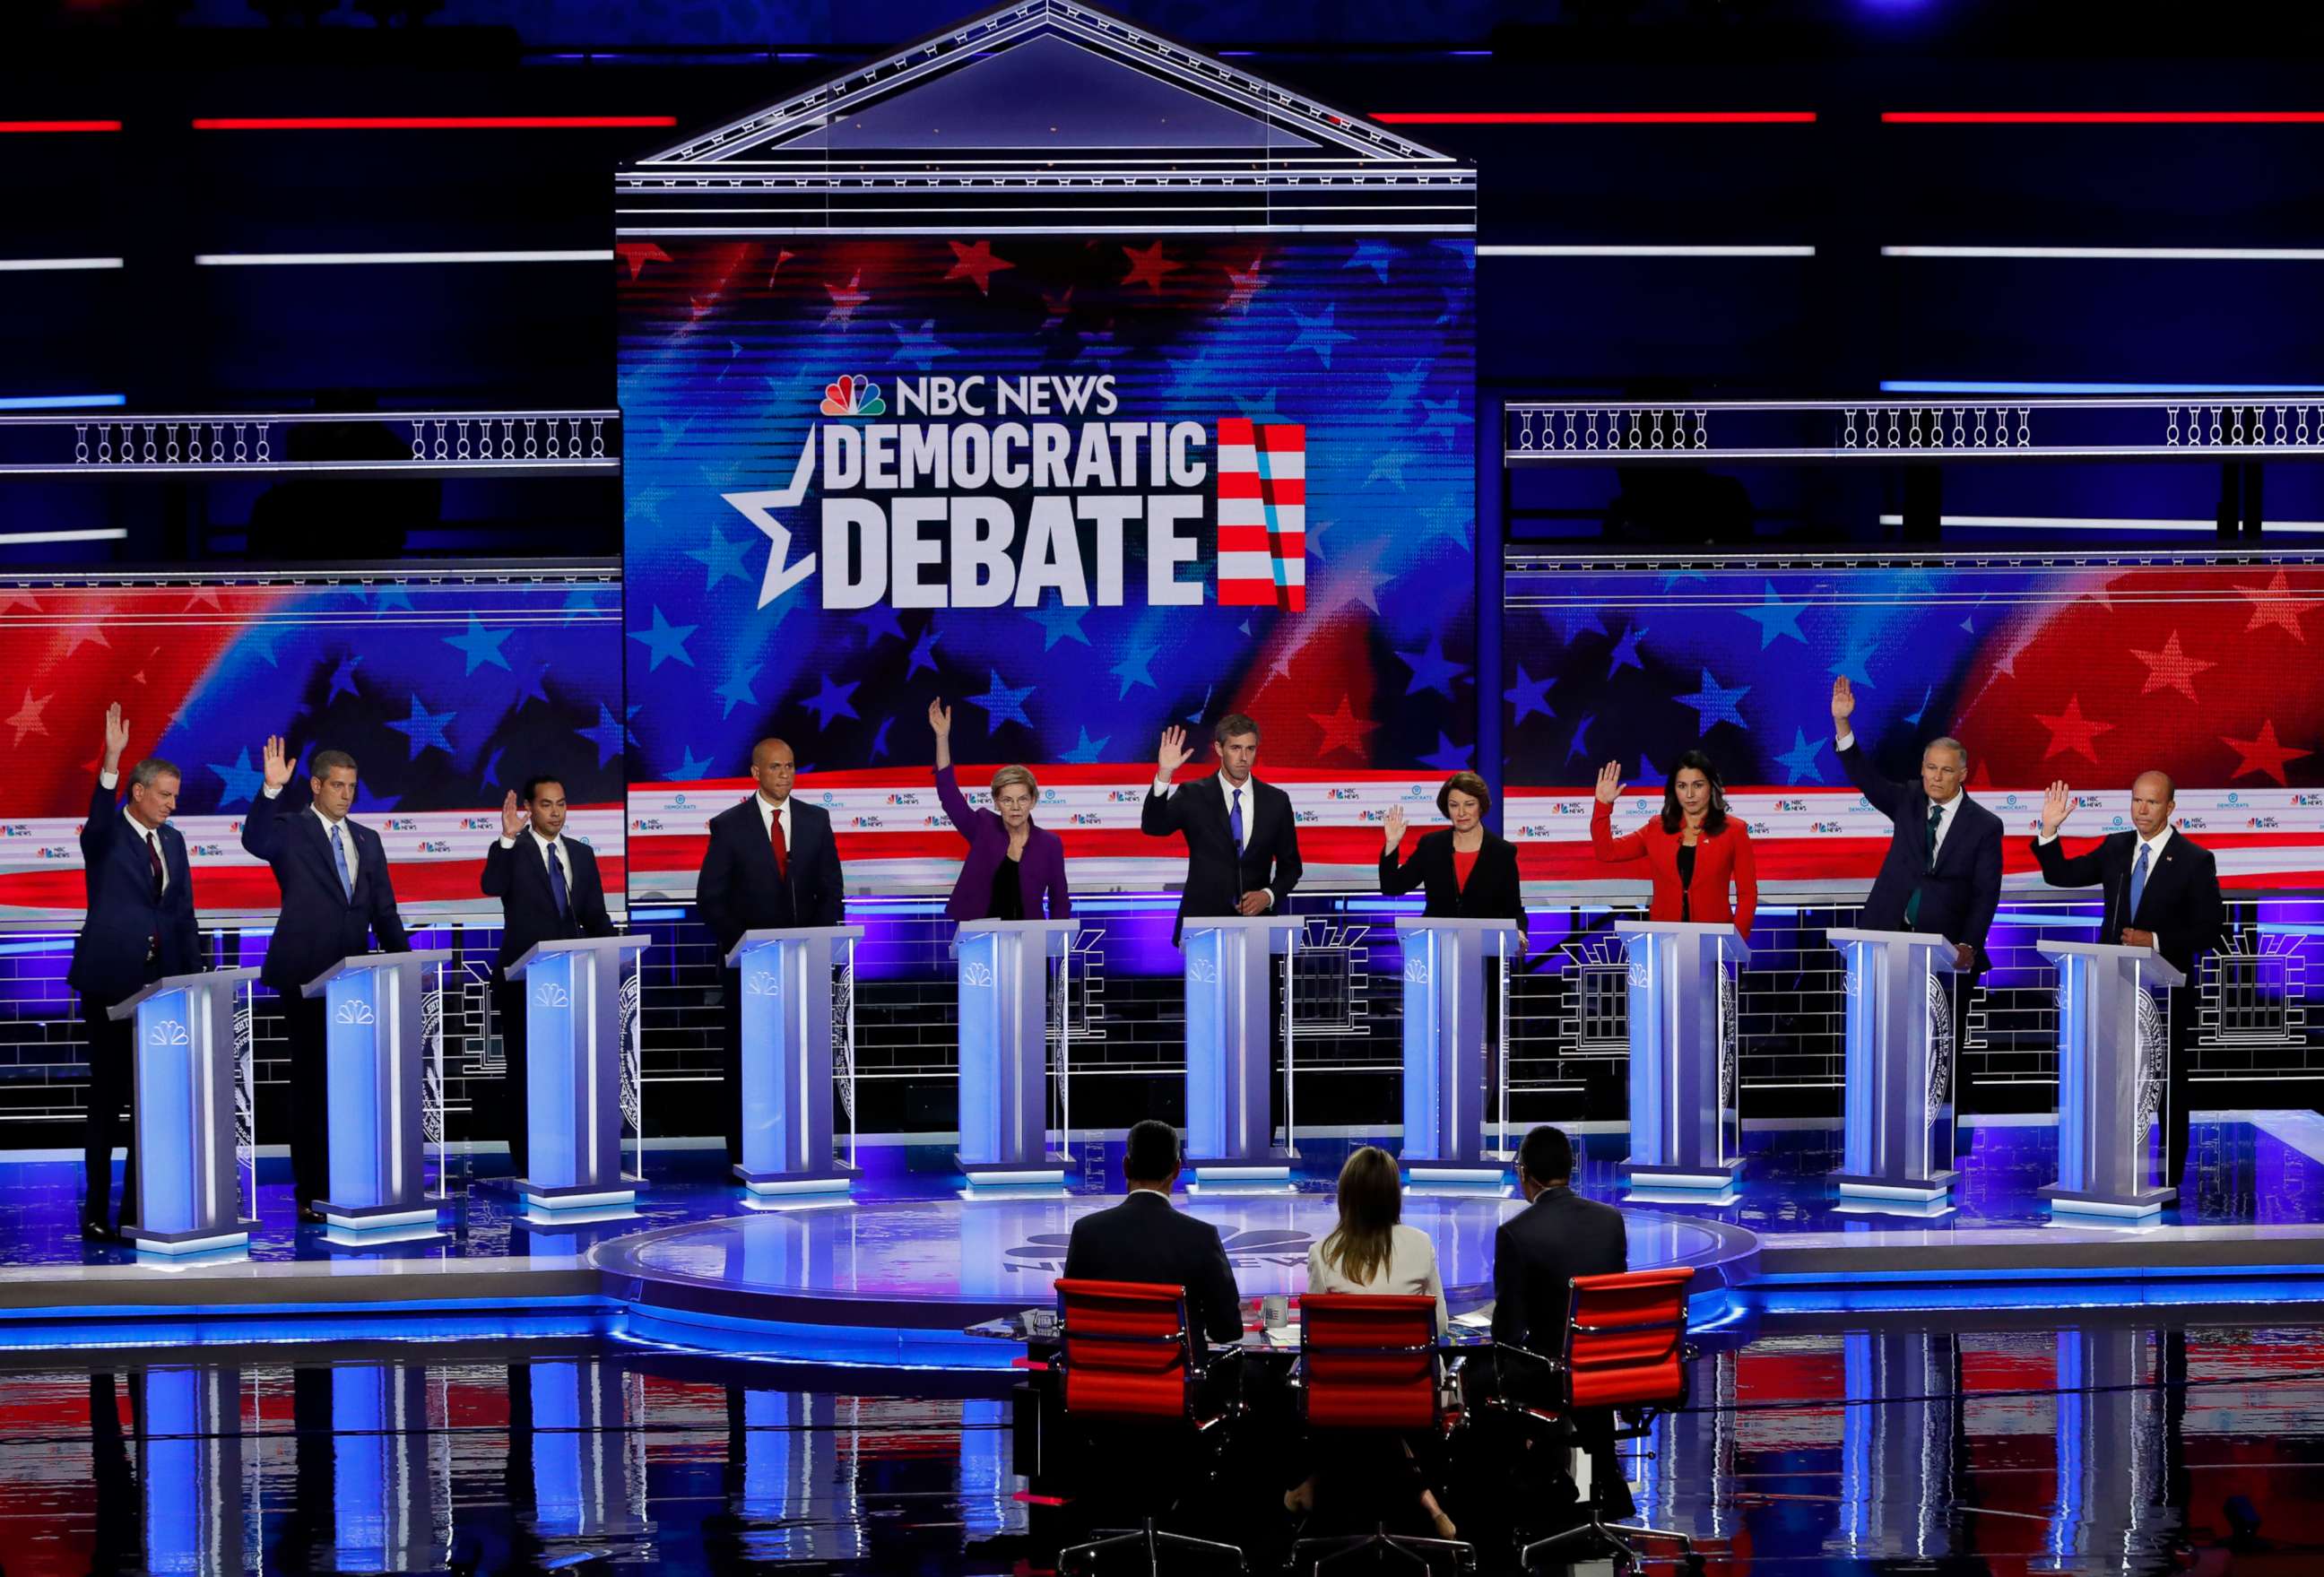 PHOTO: All candidates except Senator Cory Booker raise their hands while responding to a question during the first 2020 presidential election Democratic candidates debate in Miami, June 26, 2019.